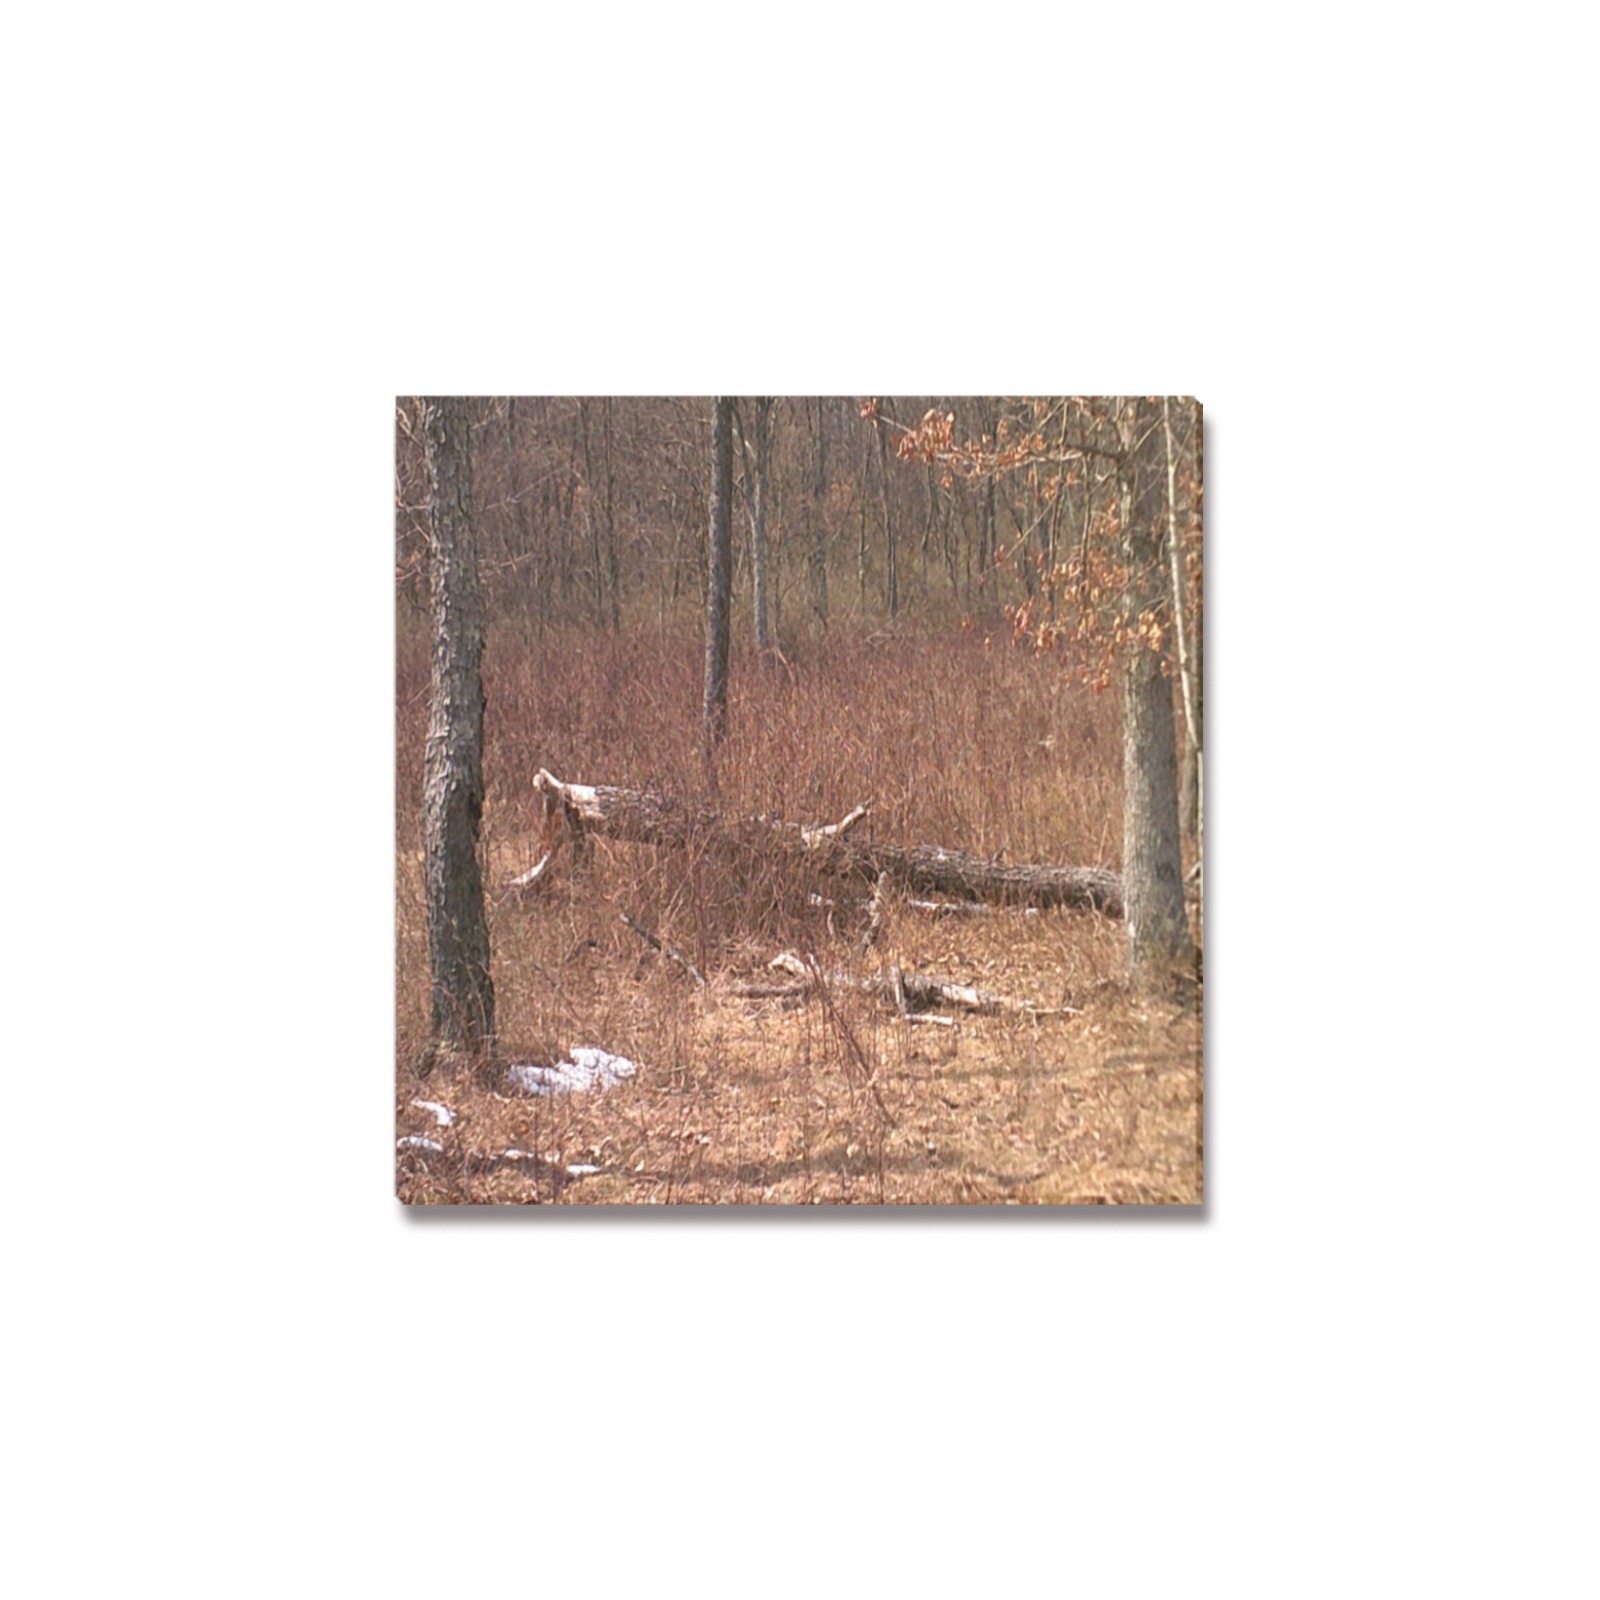 Falling tree in the woods Upgraded Canvas Print 6"x6"